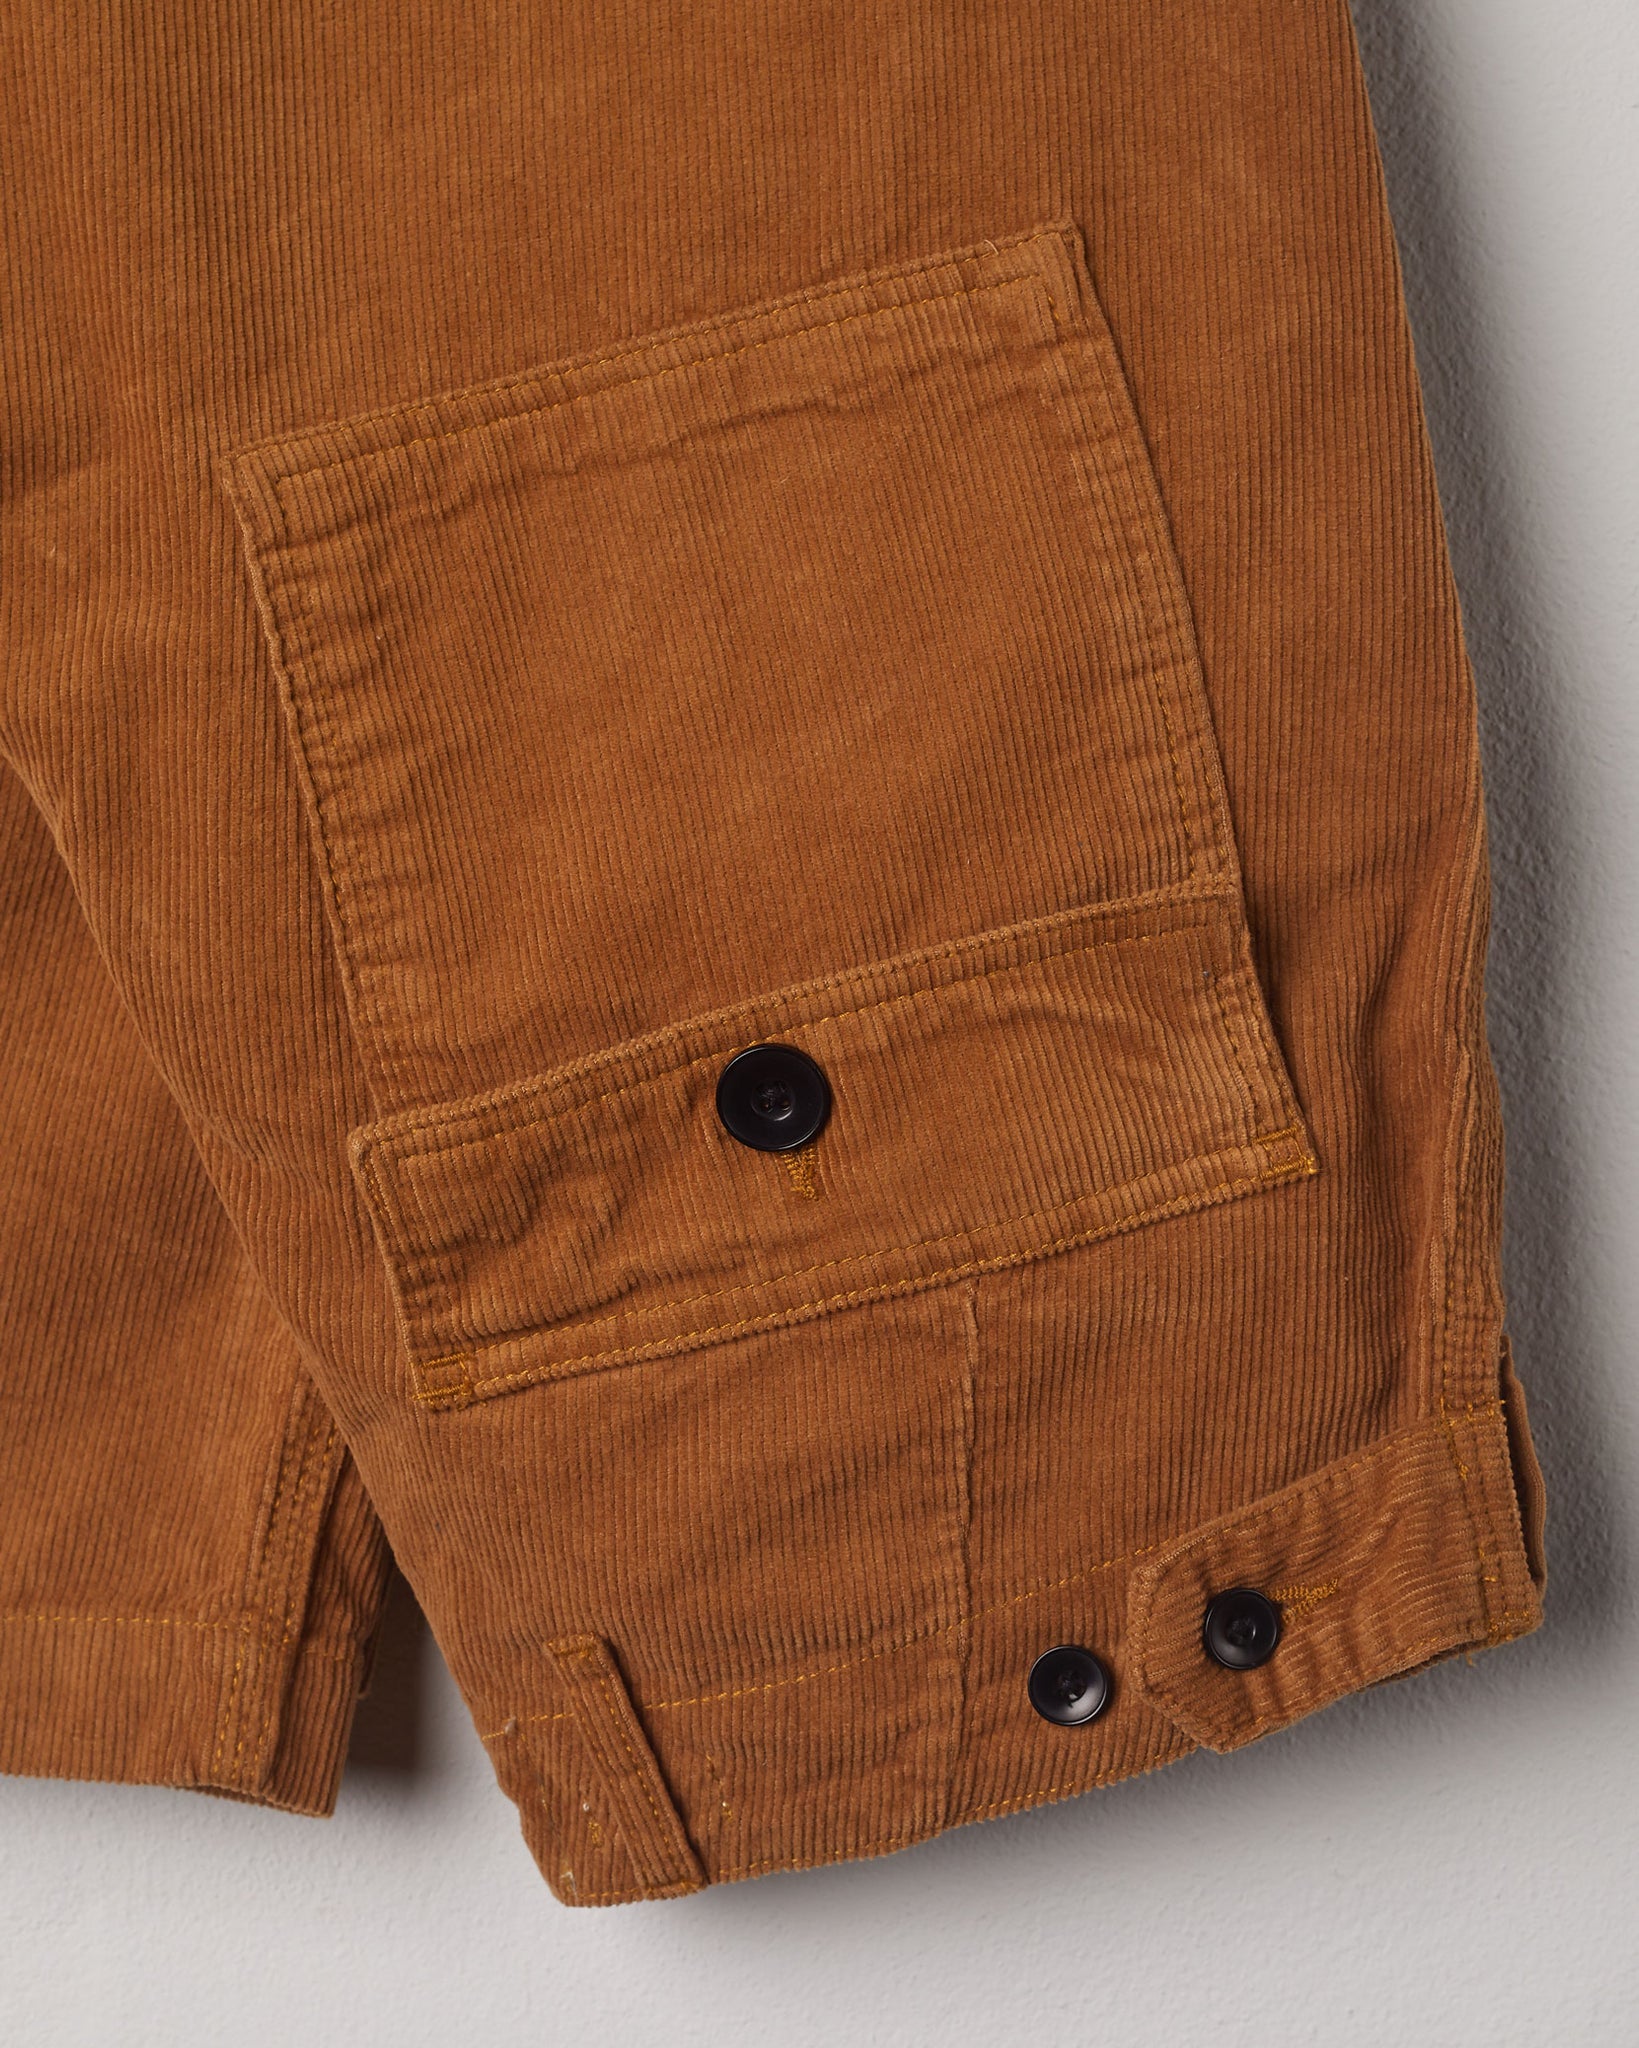 Close-up view of Uskees tan corduroy work pants with focus on natural corozo buttons, left rear pocket, belt loops, triple stitching and adjustable button waist.